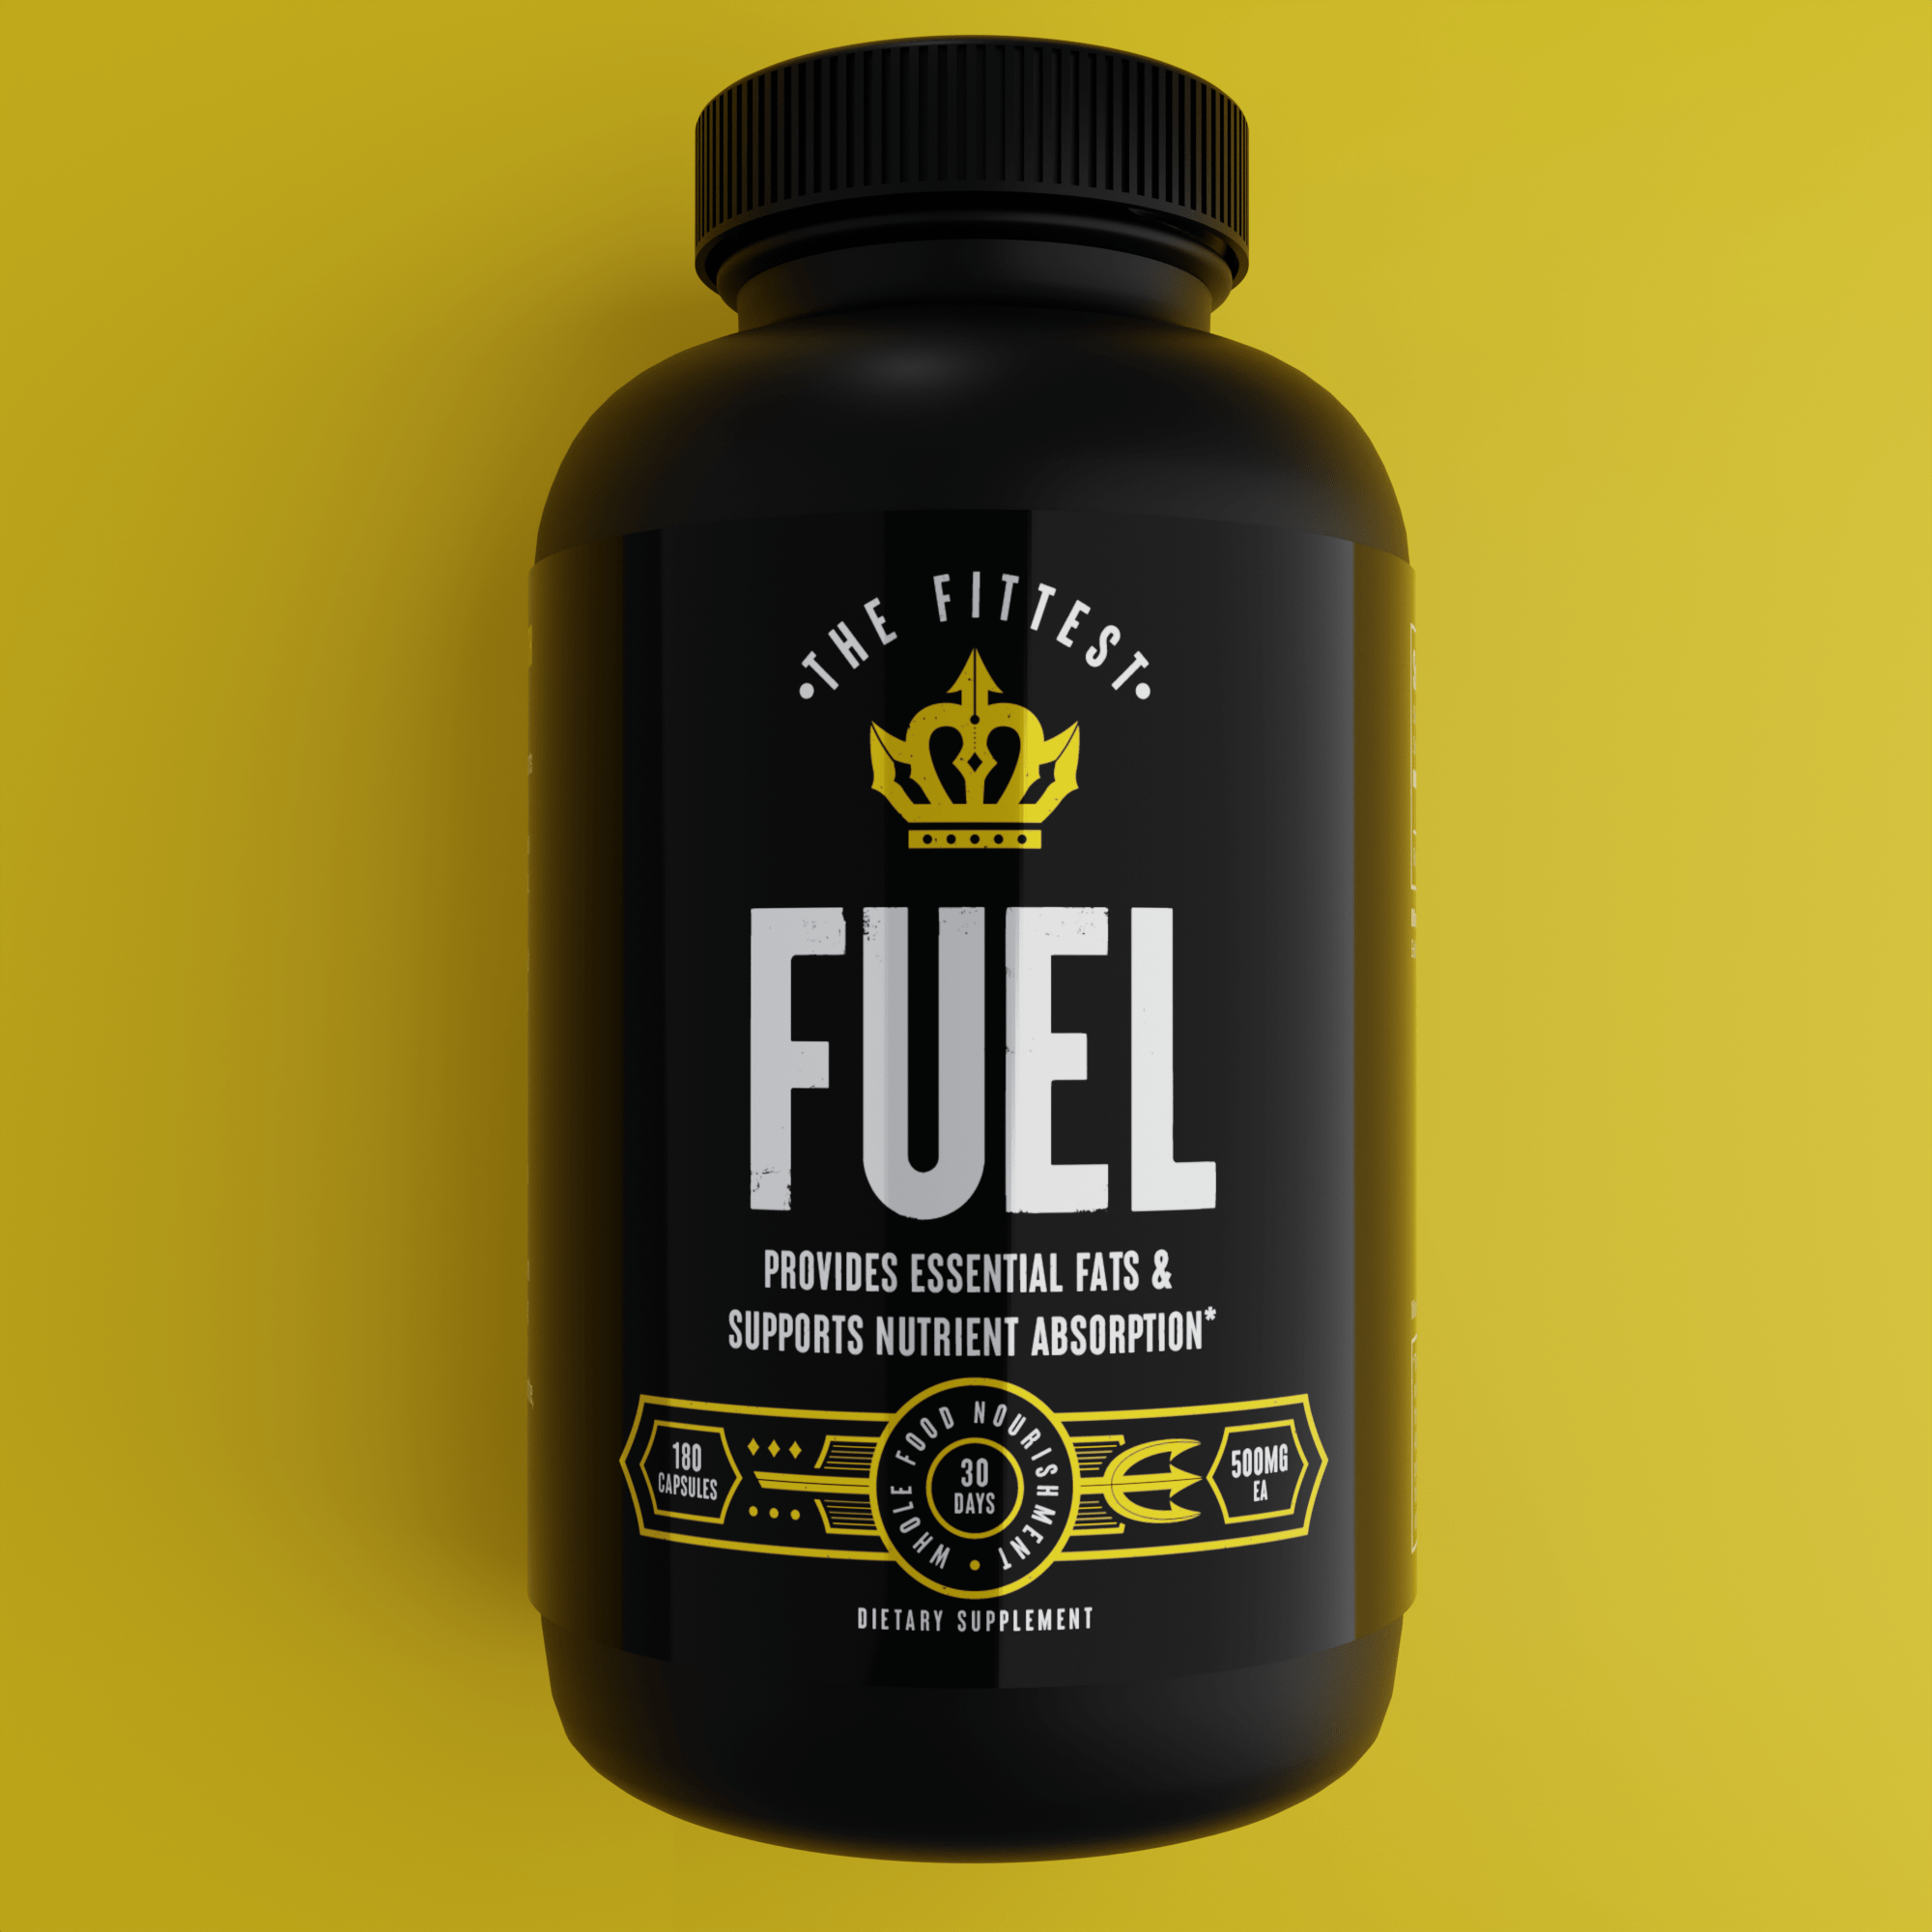 Bottle of Fuel in front of a bright yellow background